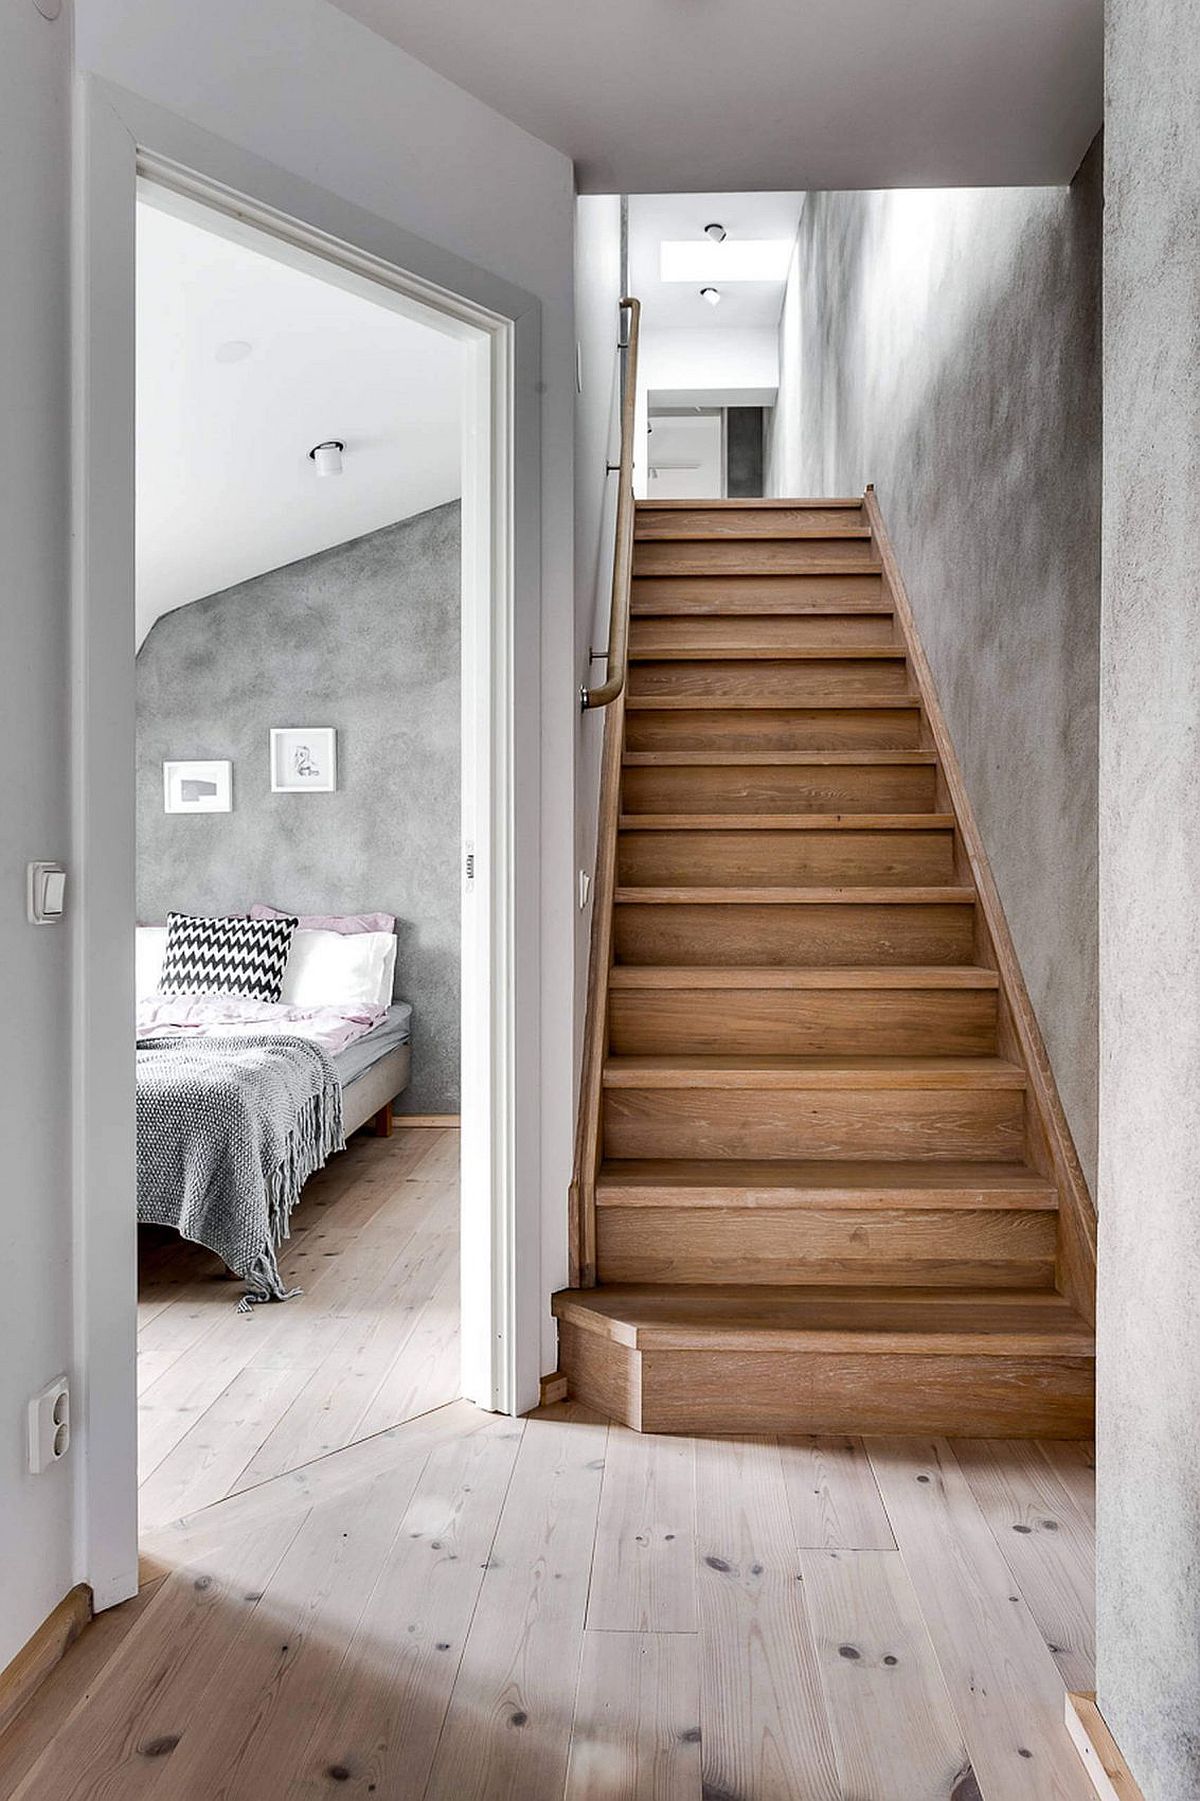 Wooden staircase leading to the ebdroom of the Scandinavian apartment